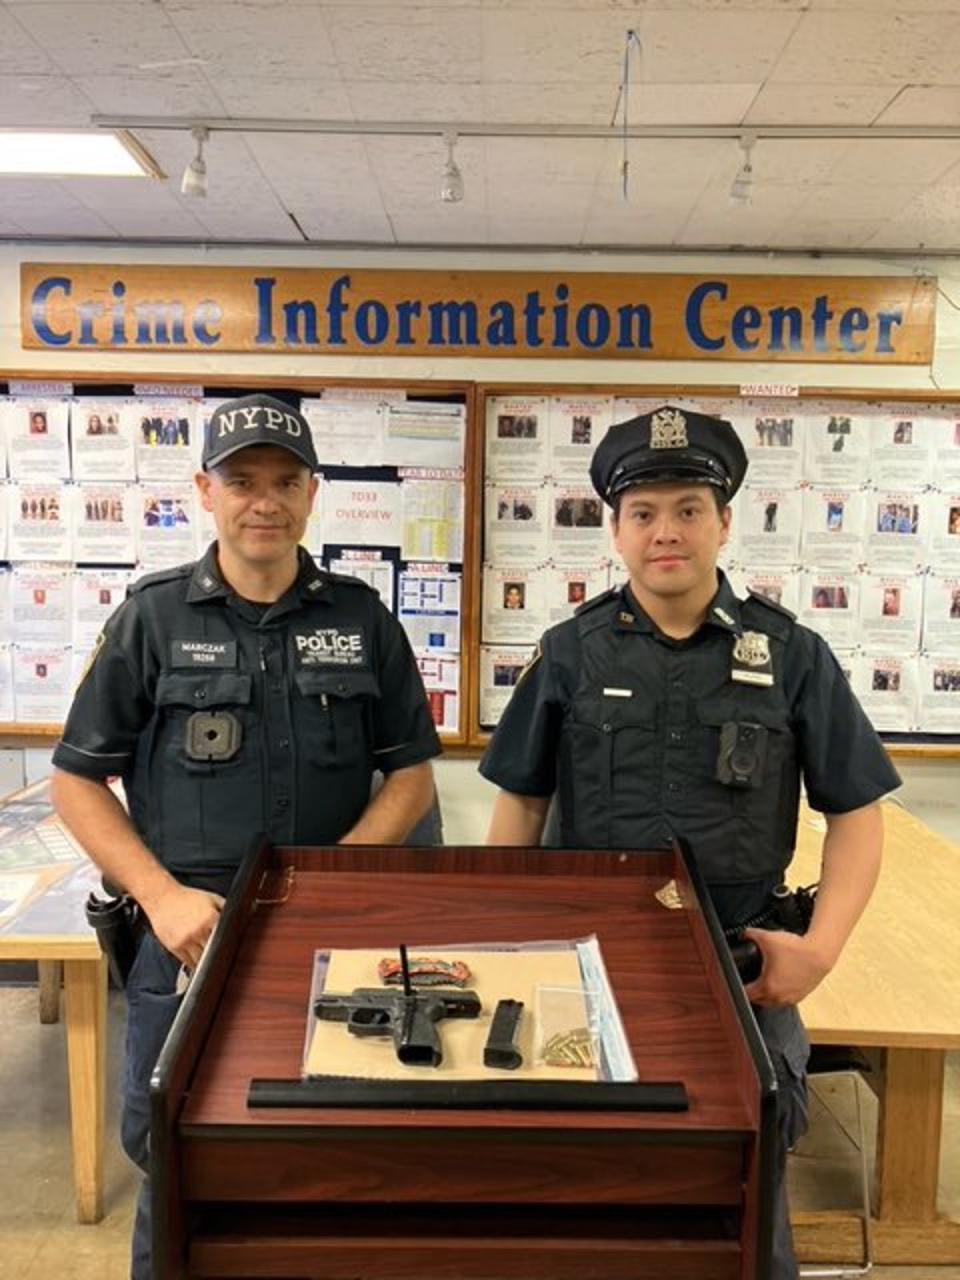 Officers pose with the gun that they seized from the sleeping man on the subway they arrested on Sunday (NYPD  Chief of Transit)